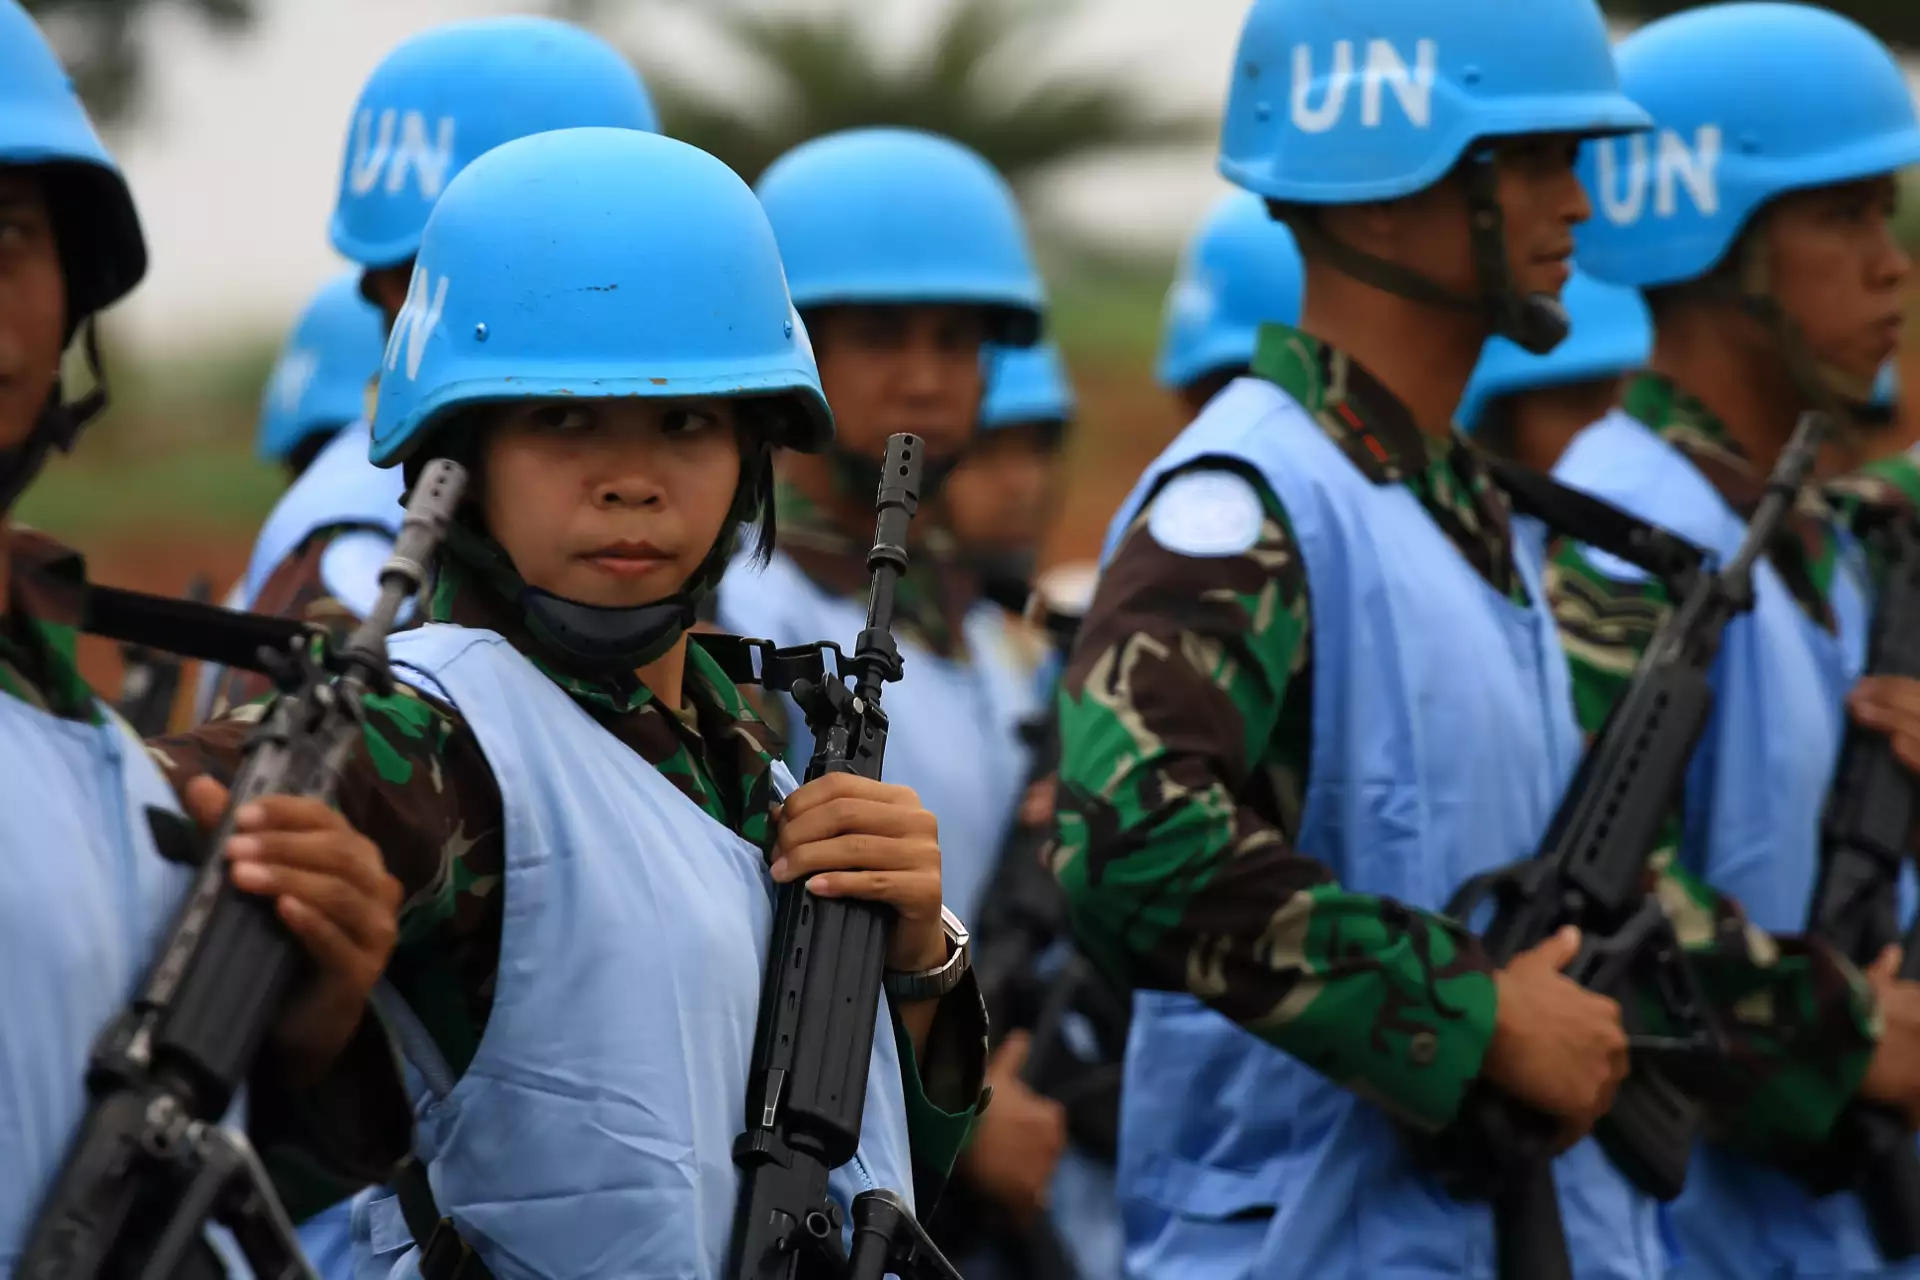 Guidance  United Nations Peacekeeping